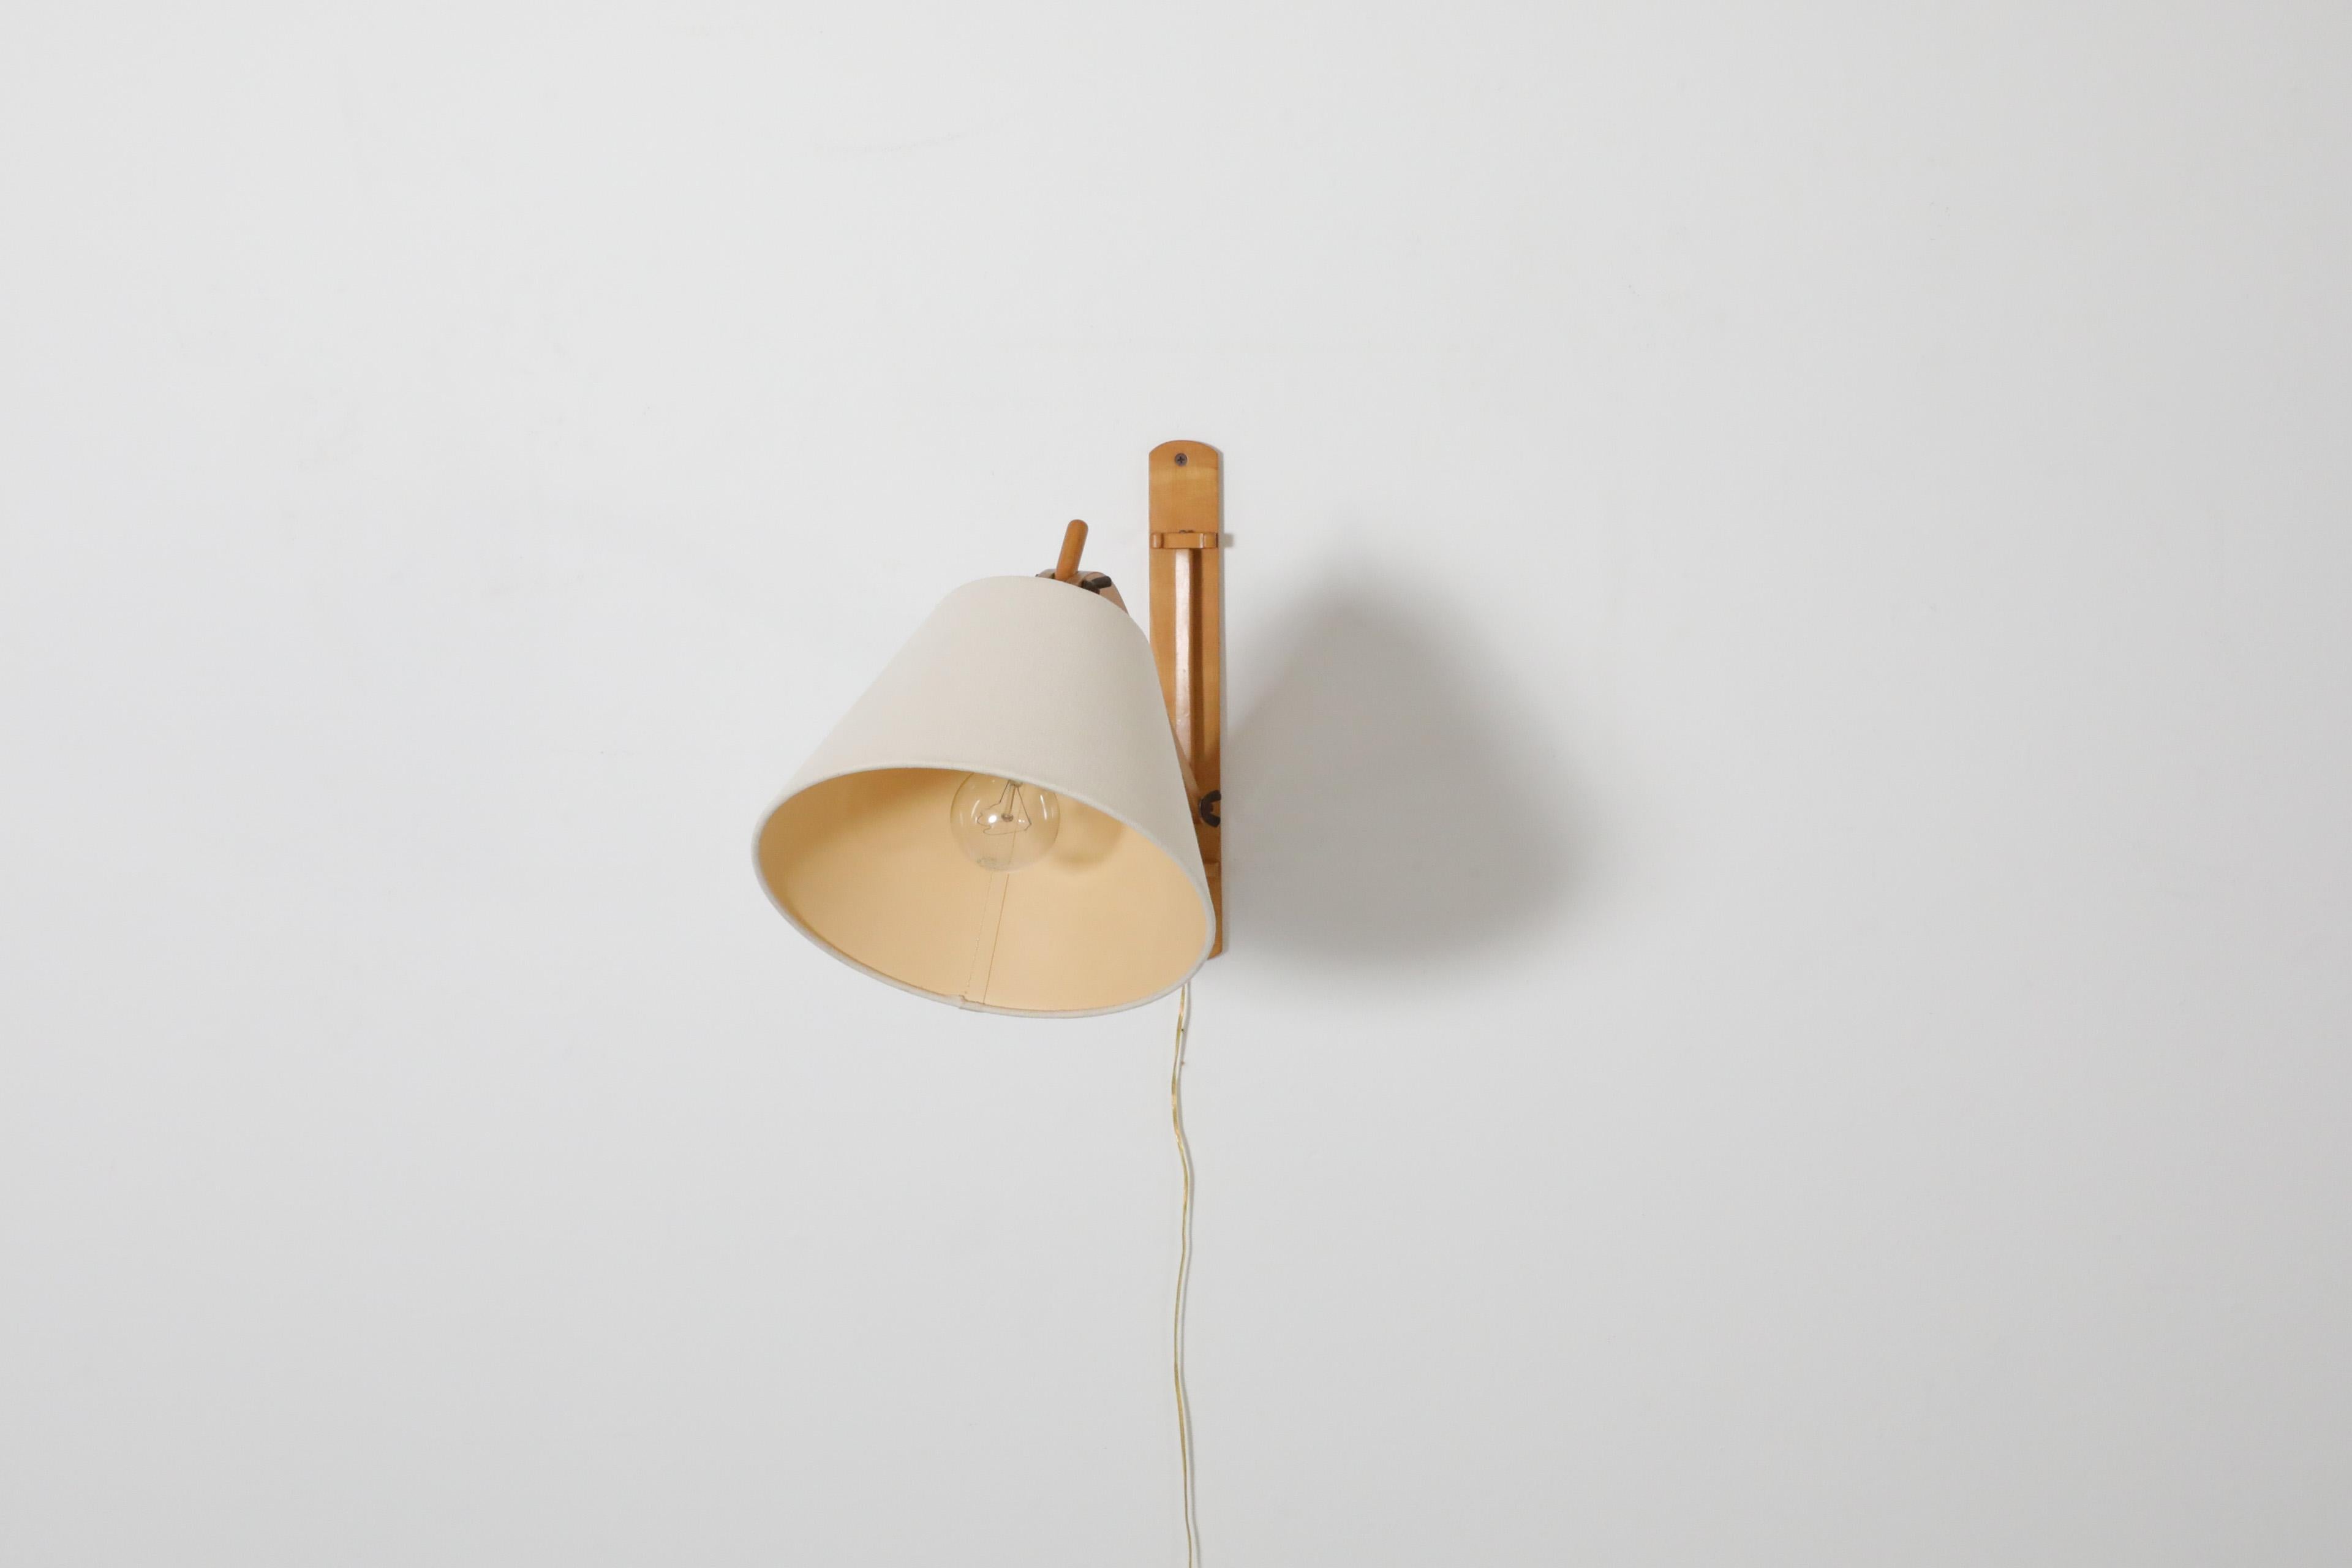 Mid-Century, Le Klint style, adjustable wall lamp in blonde wood with fabric shade. A cute light weight wall mount lamp with bent wood frame and metal accents. Lightly refinished, in otherwise good original condition with wear consistent with its